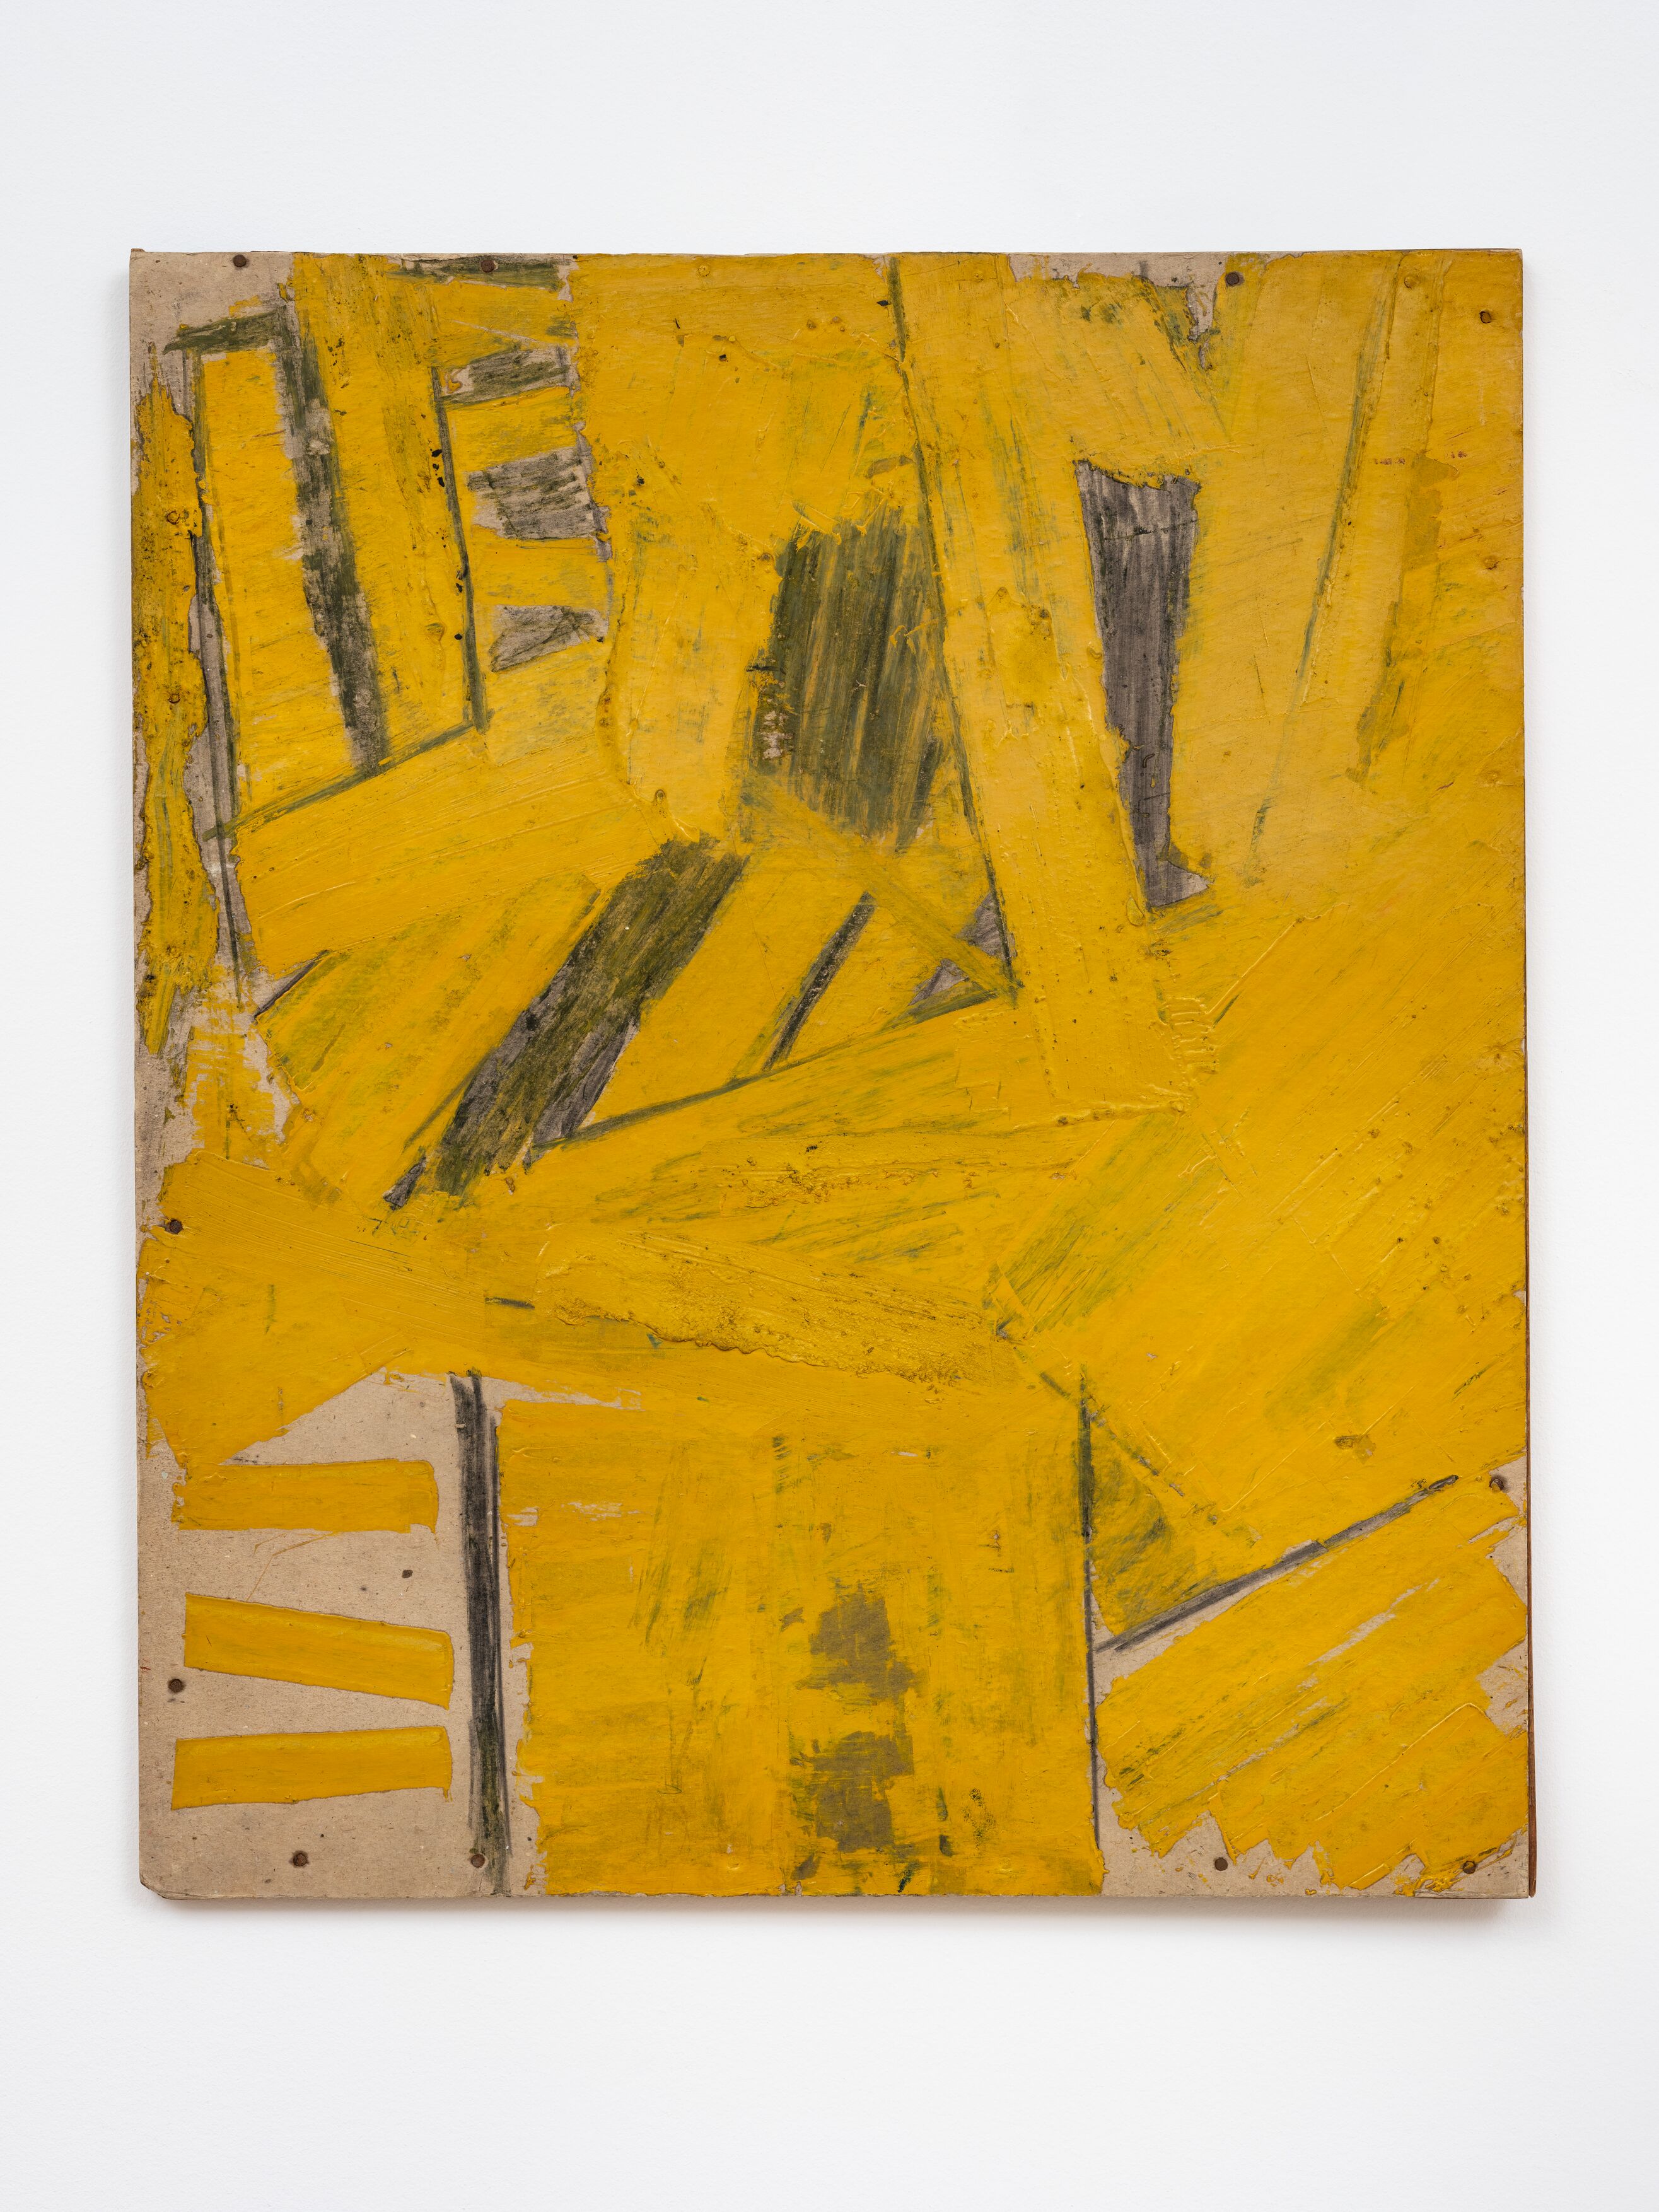 ‘Painting on Cardboard’ (1958): Metzger went on strike between 1977-1980, making no art at all